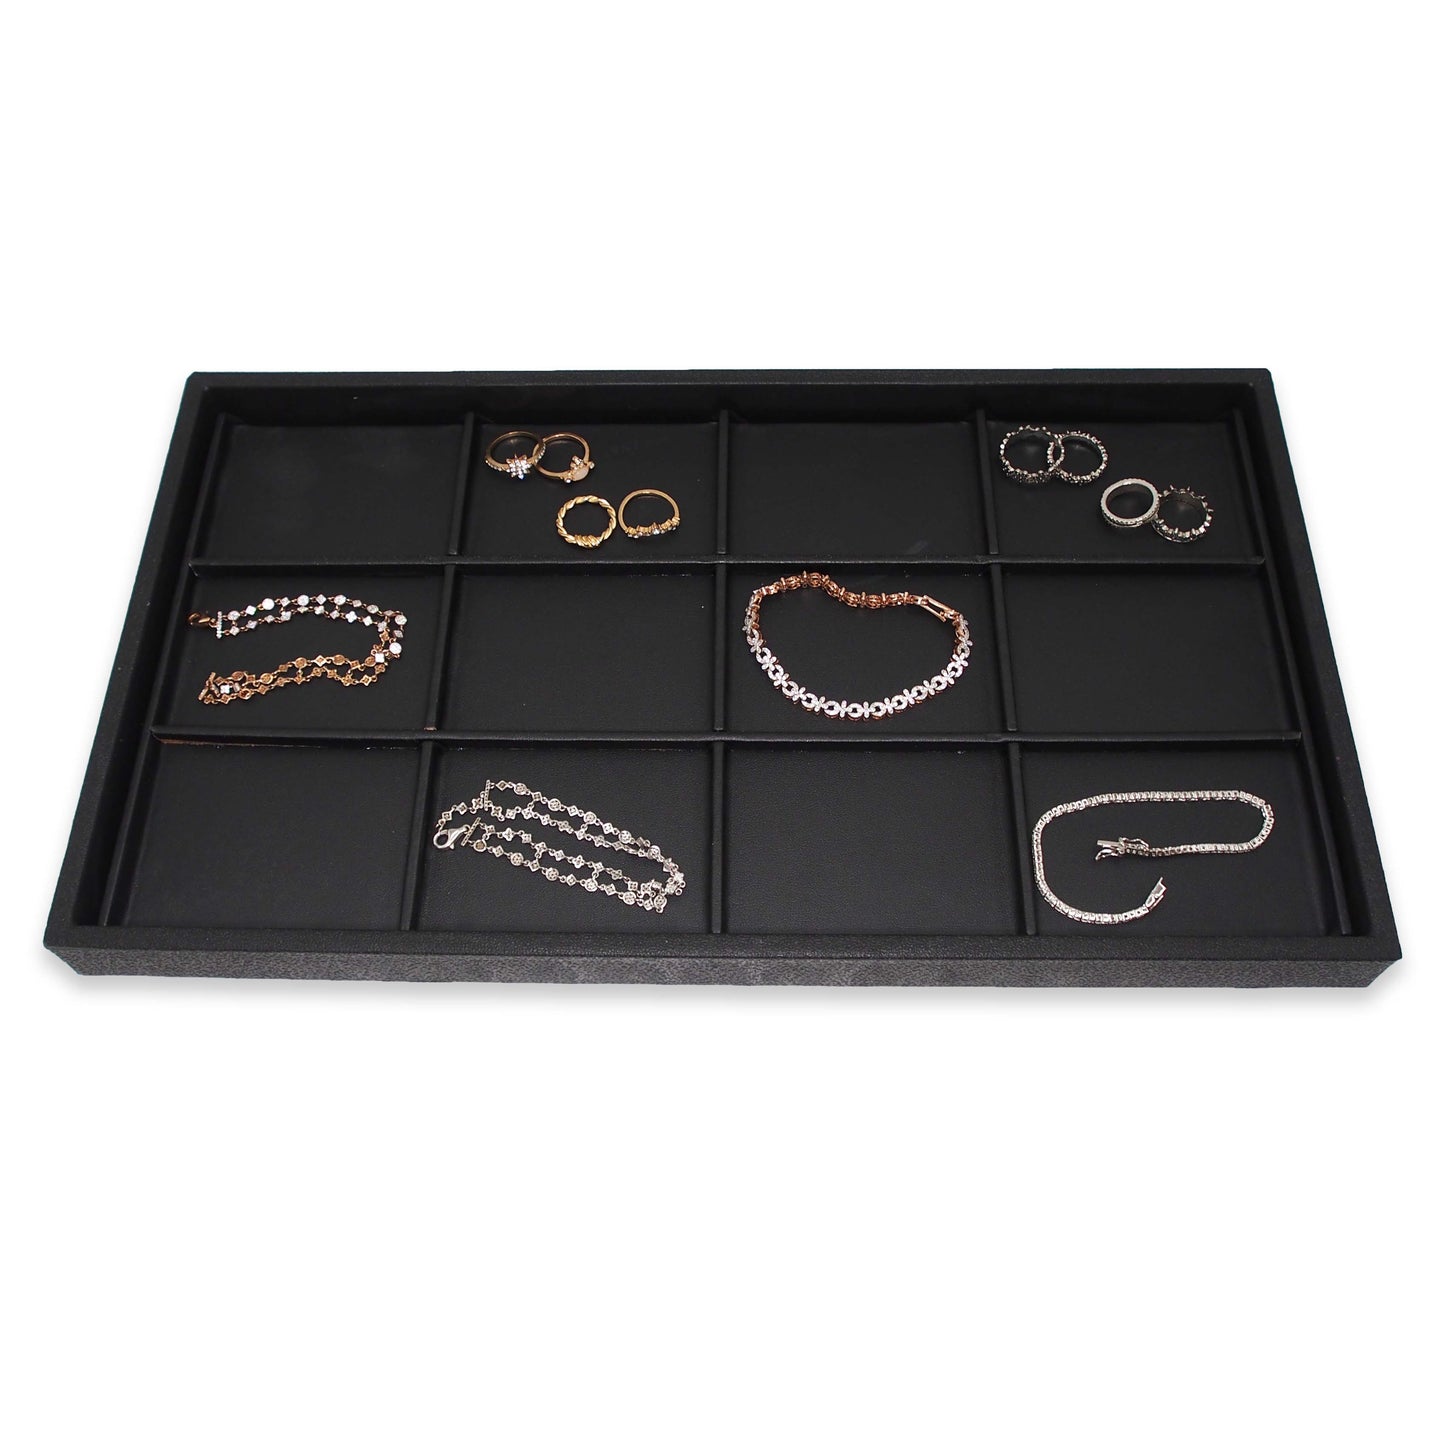 Black Faux Leather 12 Section Jewelry Deluxe Tray Insert Liner